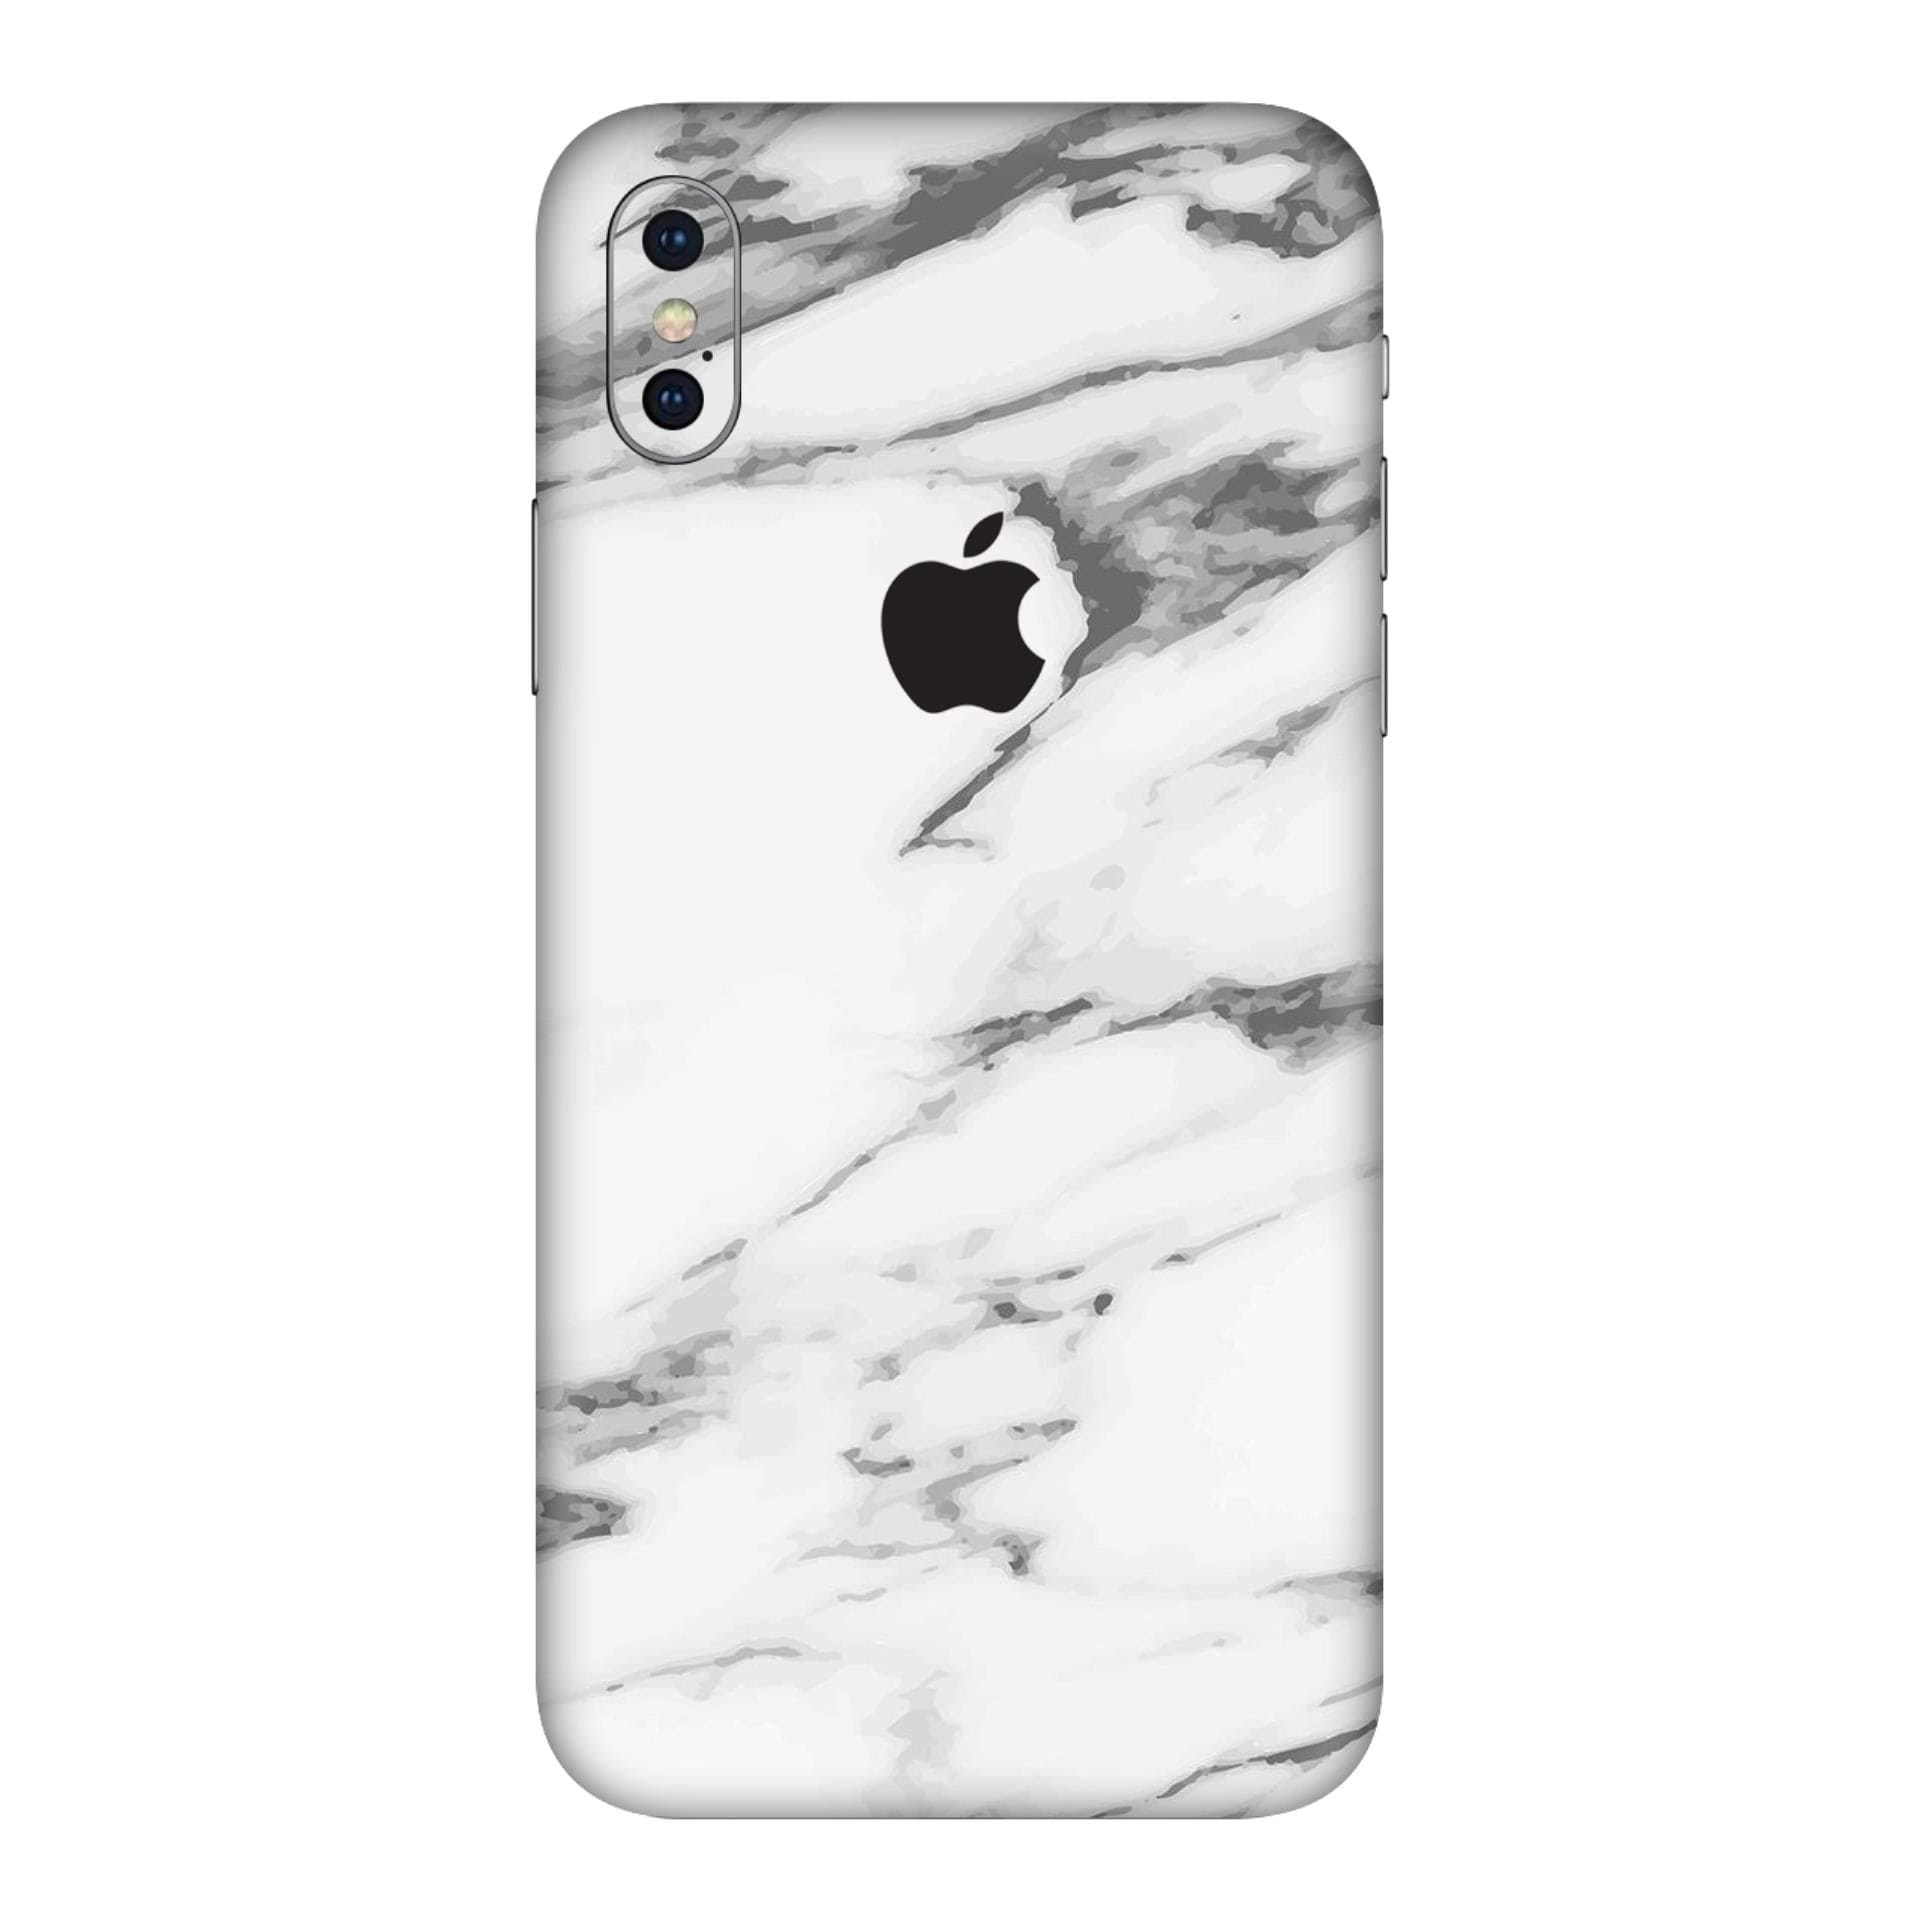 iphone XS Max White Marble skins